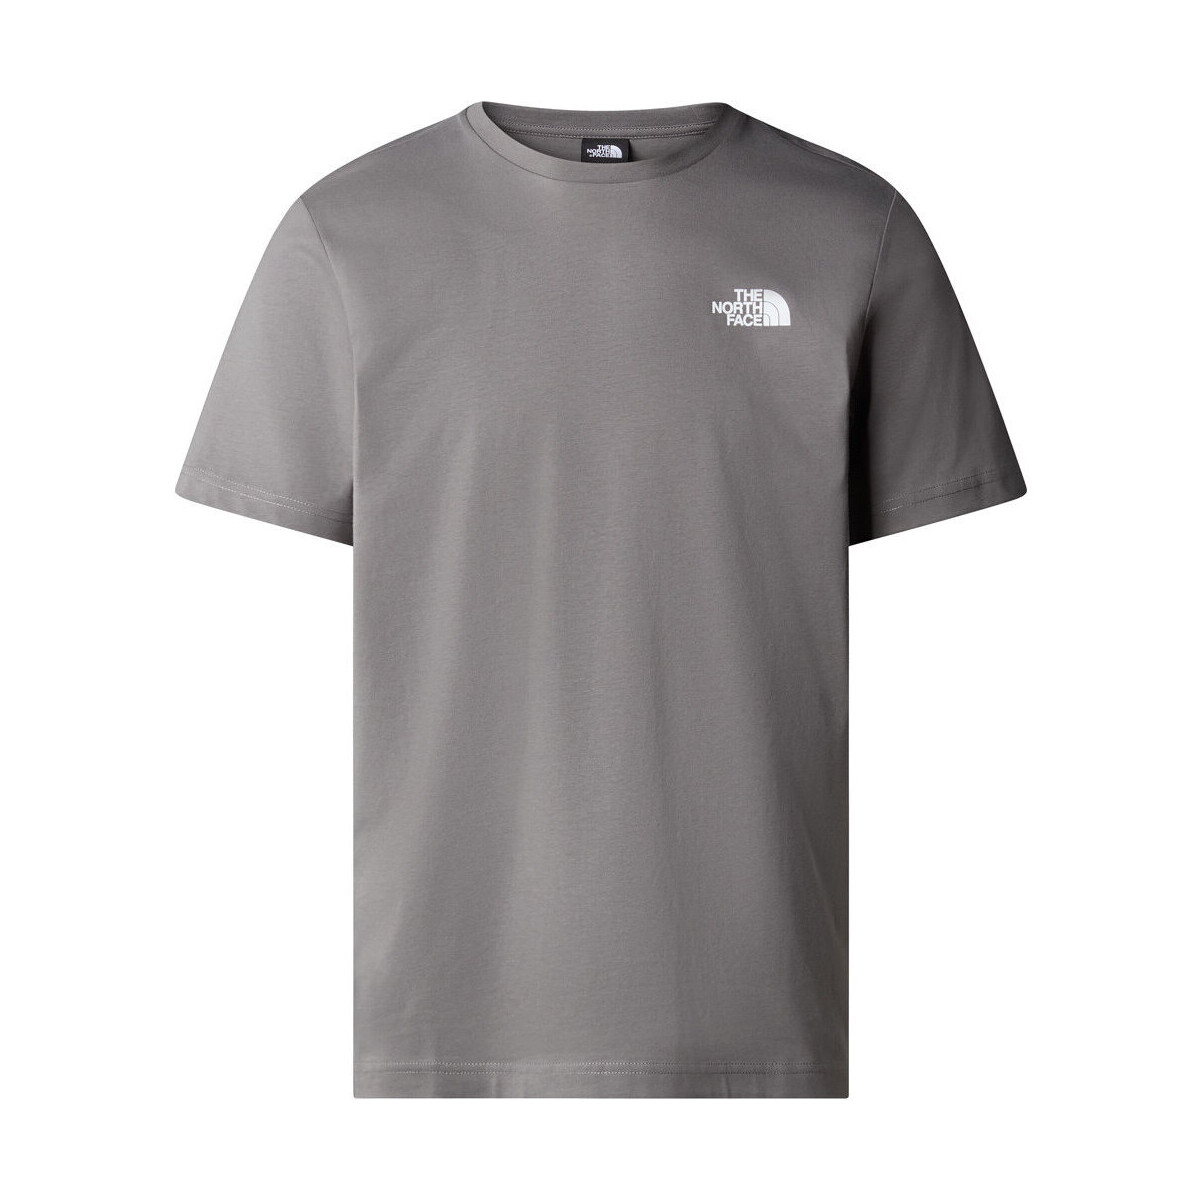 Vêtements Homme Polos manches courtes The North Face M S/S REDBOX TEE Gris